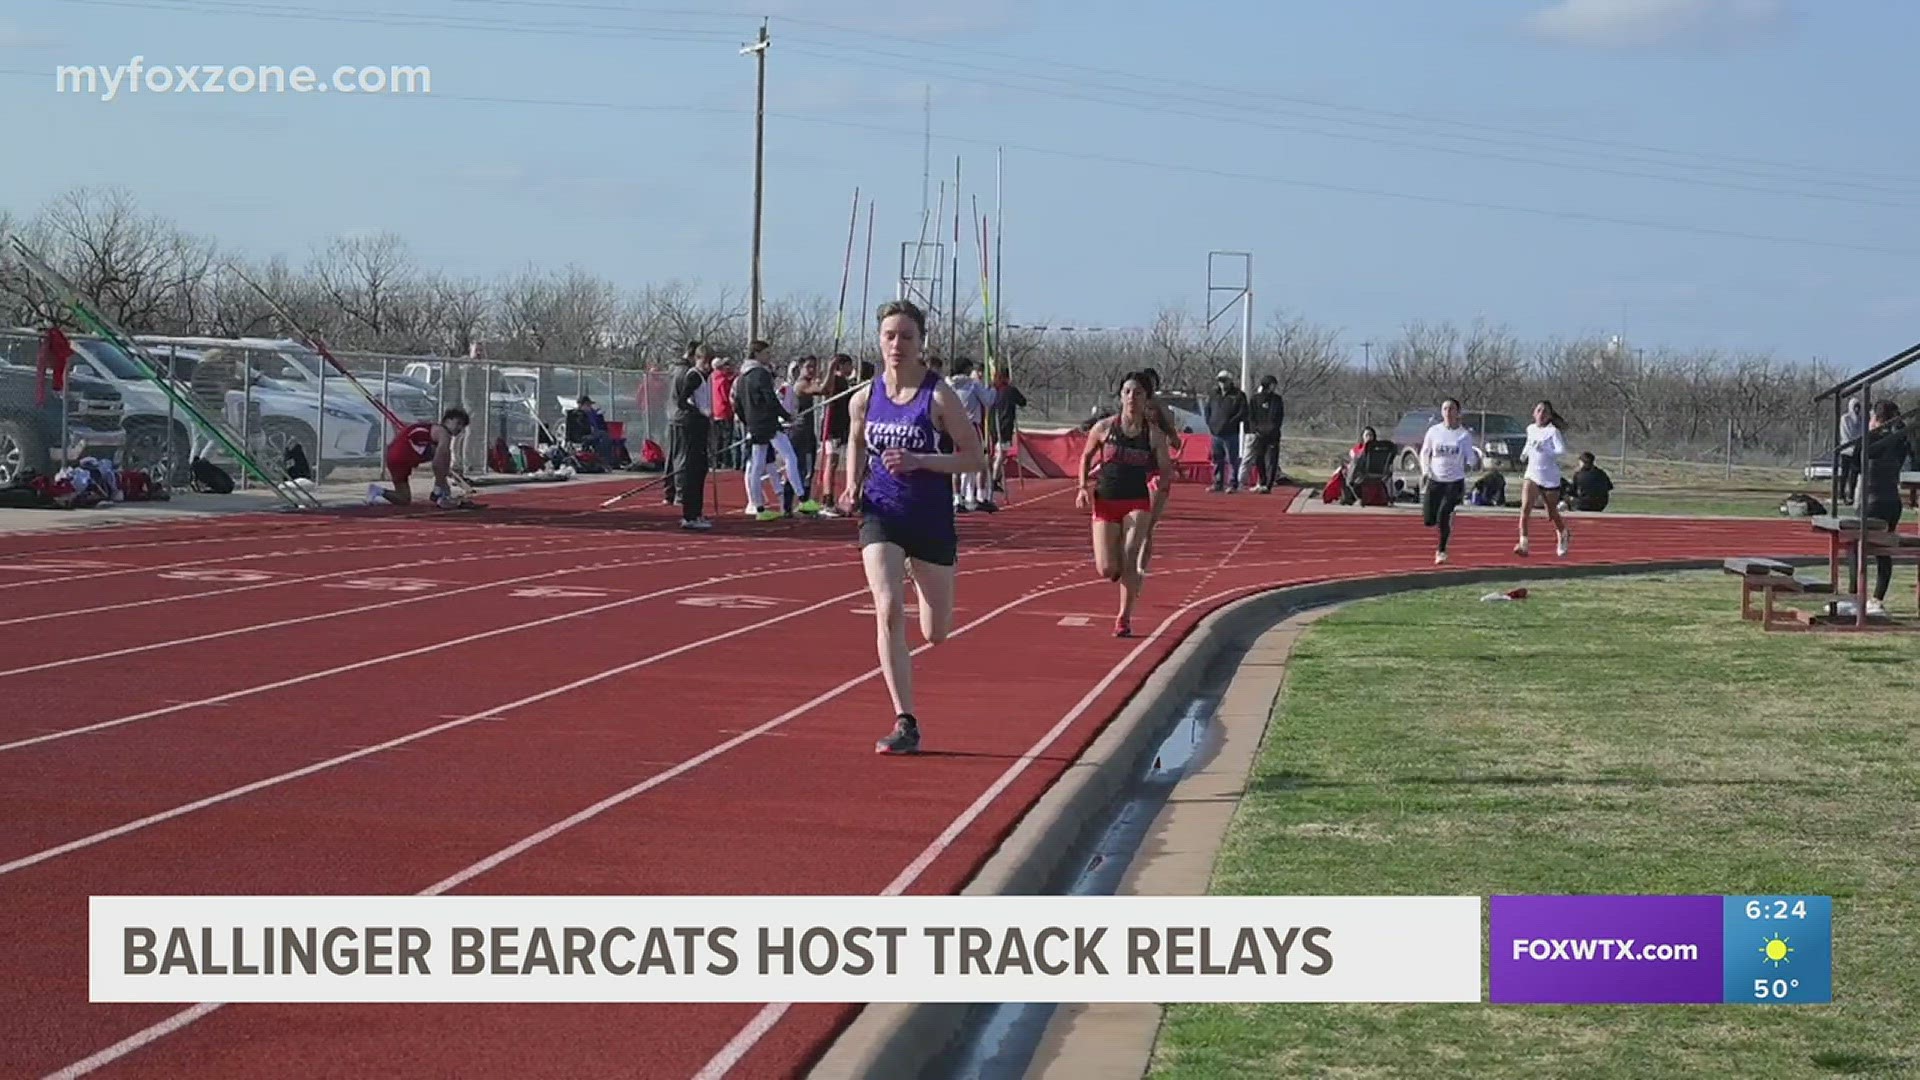 Several West Texas schools gathered to compete in track and field events.